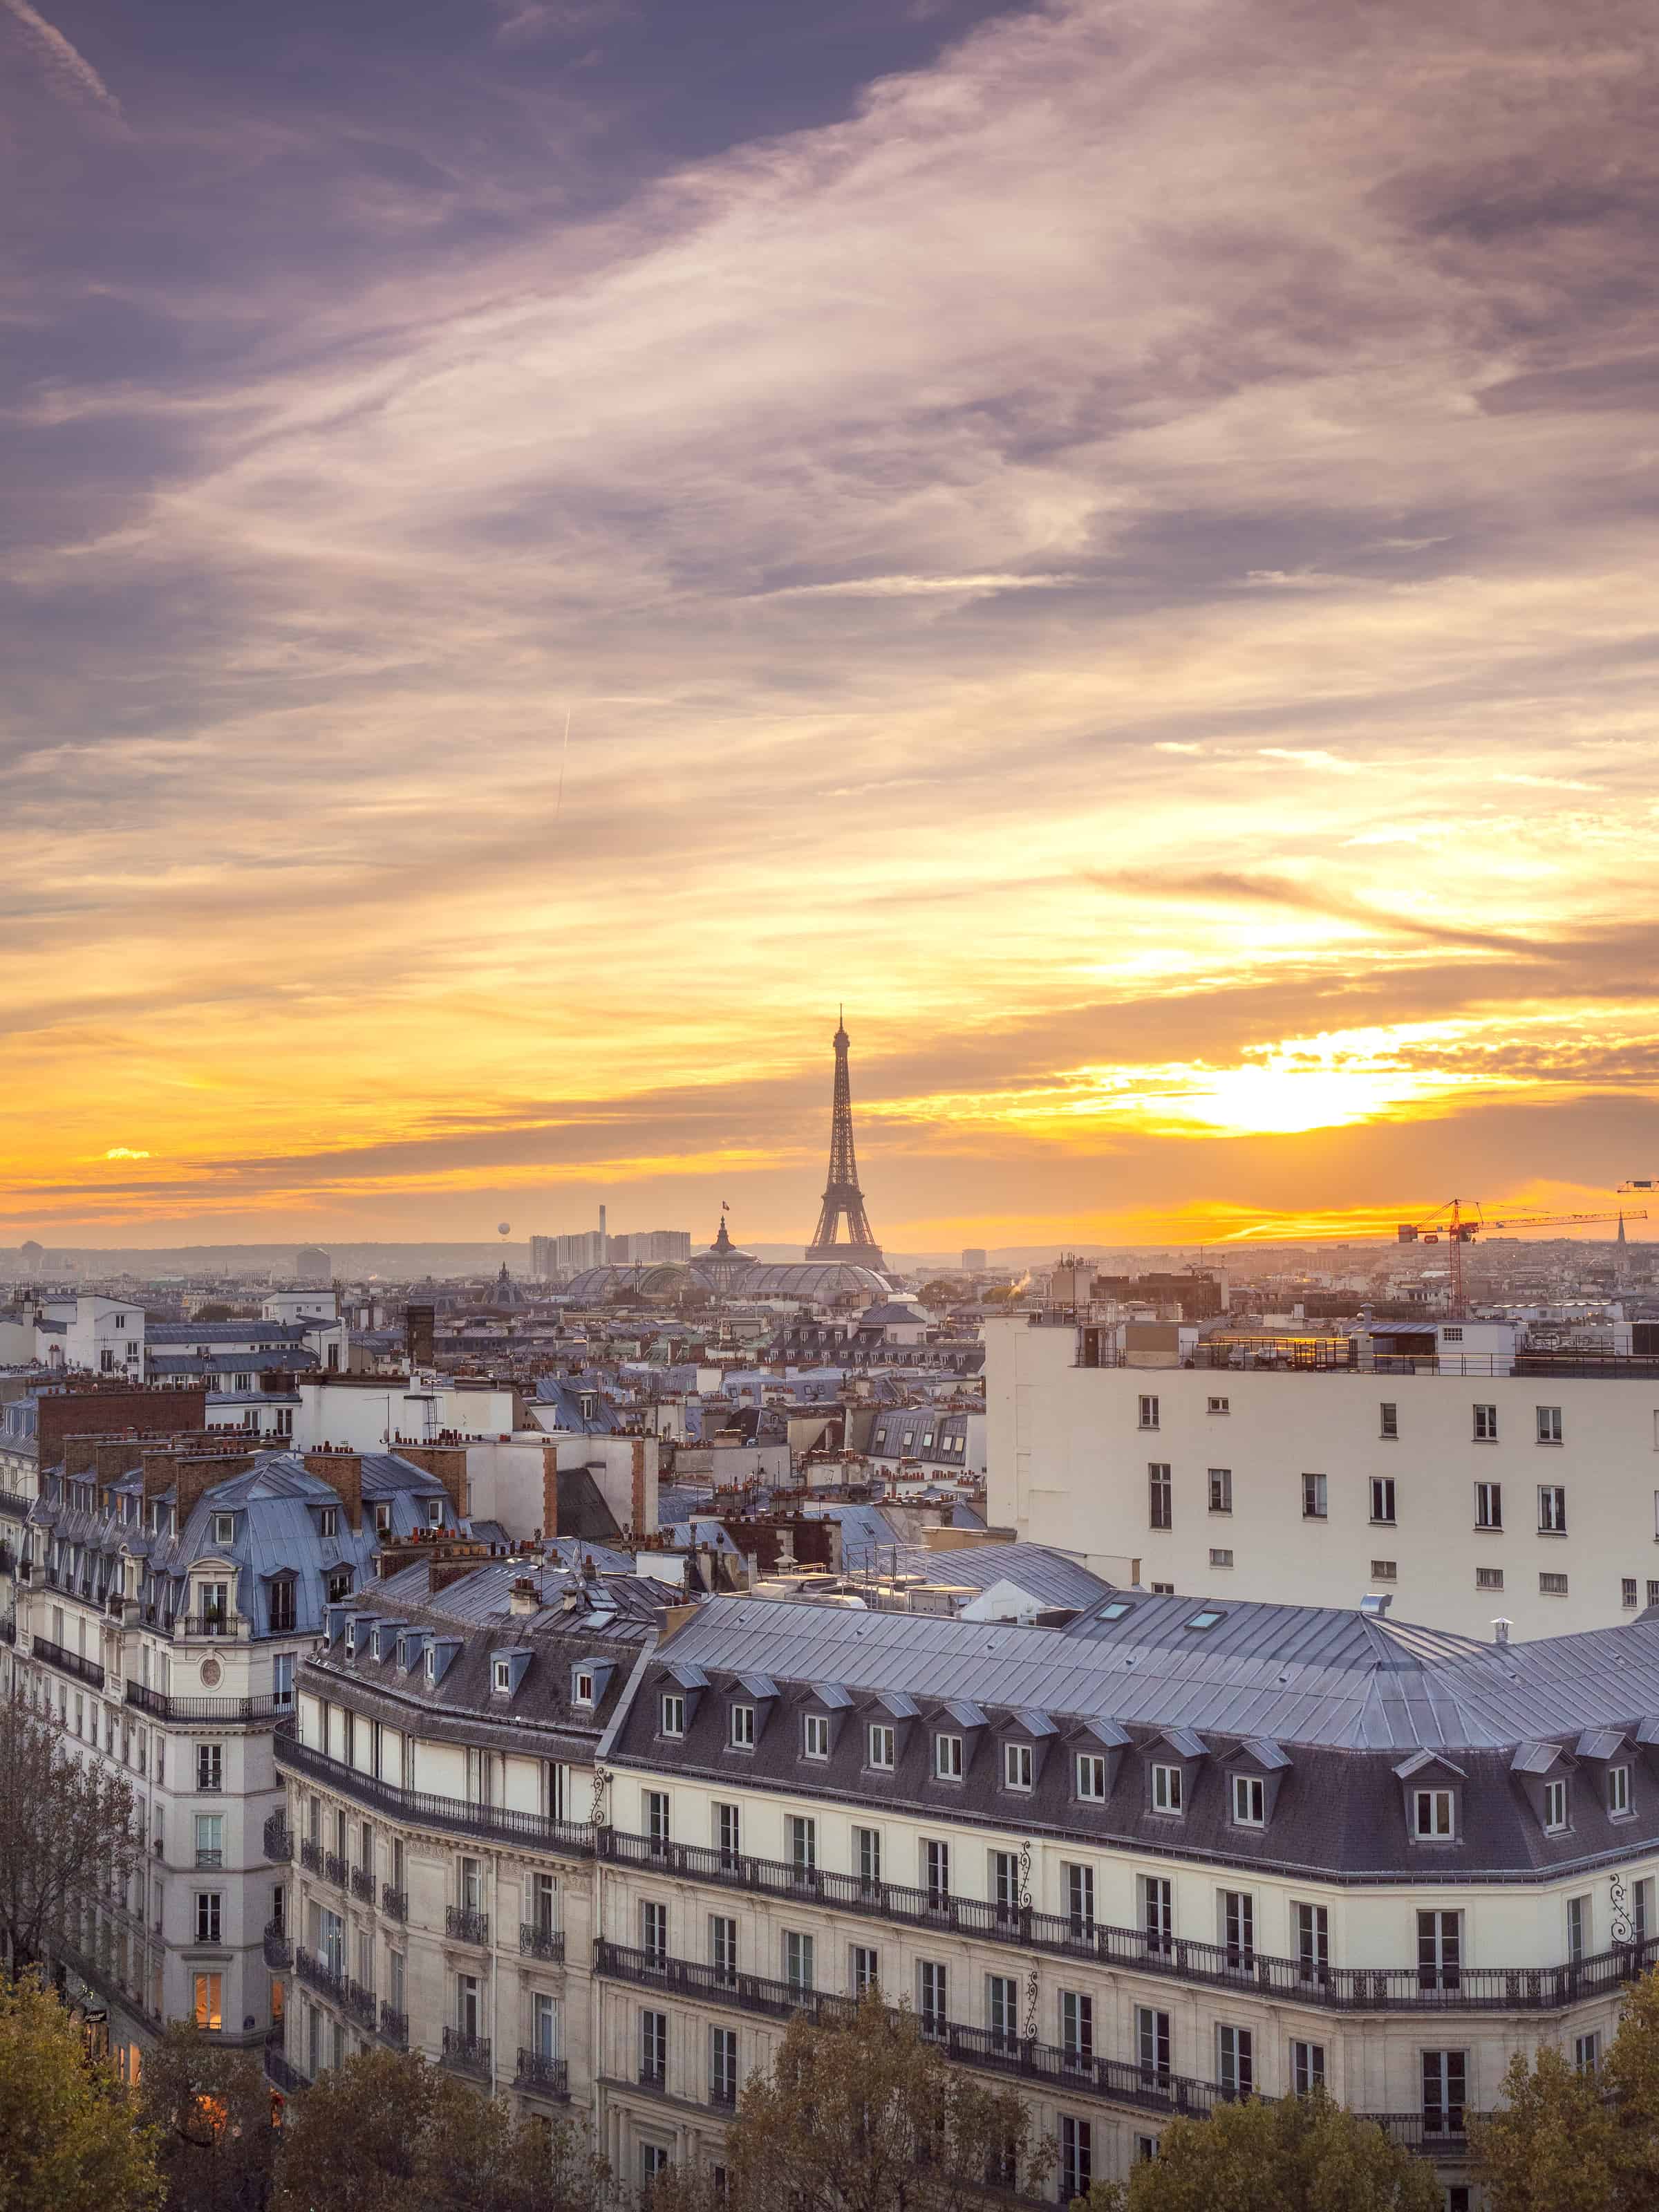 Printemps Department Store Offers One Of The Most Underrated Sunset Views In Paris